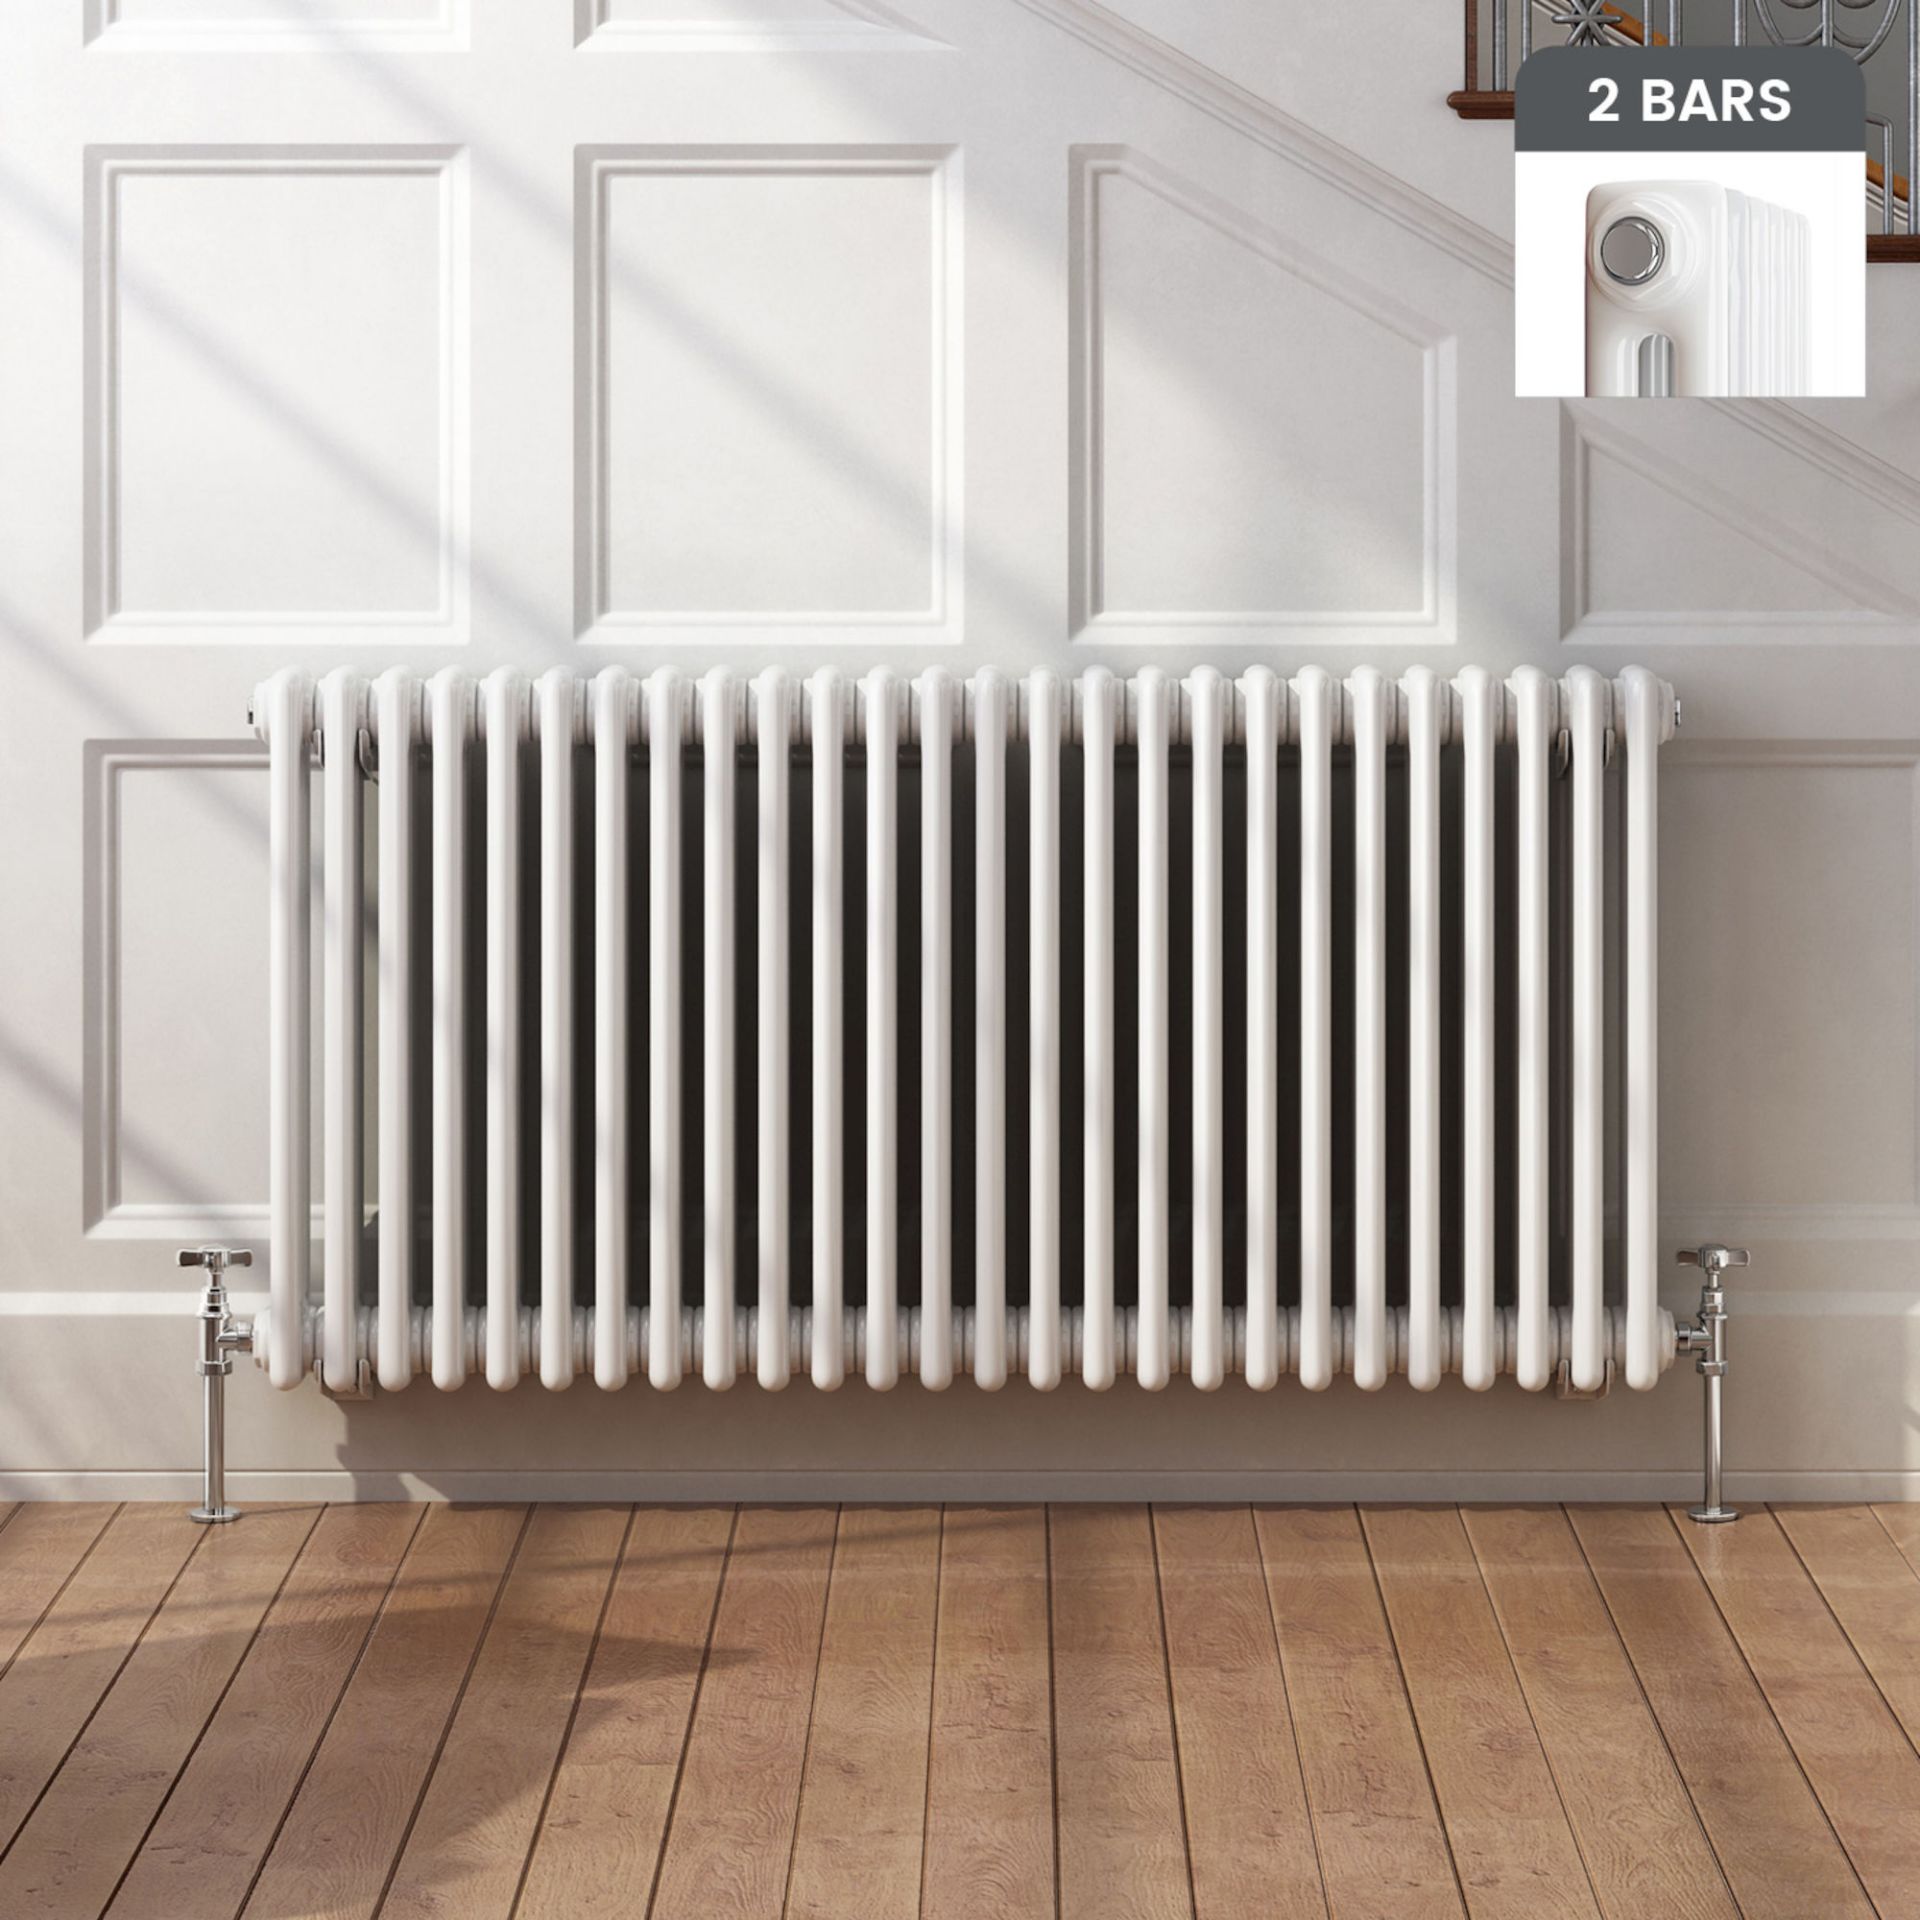 (OS84) 600x1226mm Traditional White Double Panel Horizontal Column Radiator. RRP £522.99. Made